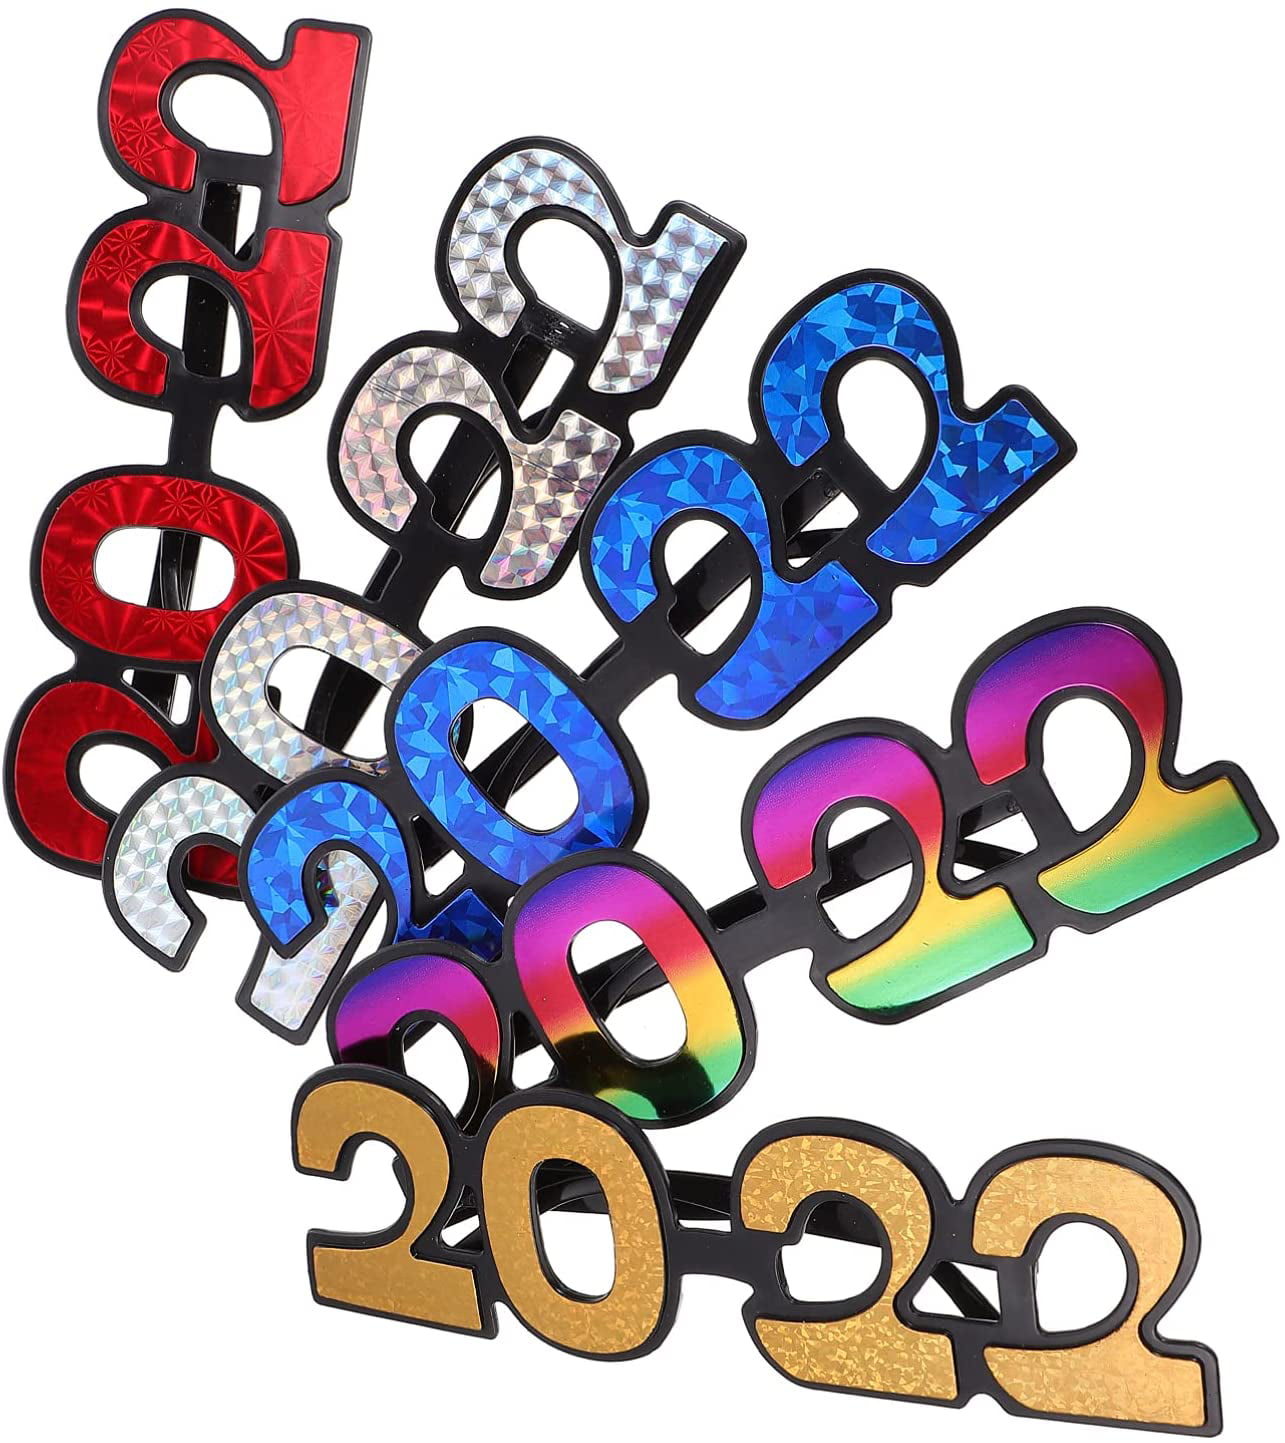 VALICLUD 2022 Happy New Year Glasses Frames Fancy New Year Party Glasses Celebration Party Favor for New Years Eve Party 